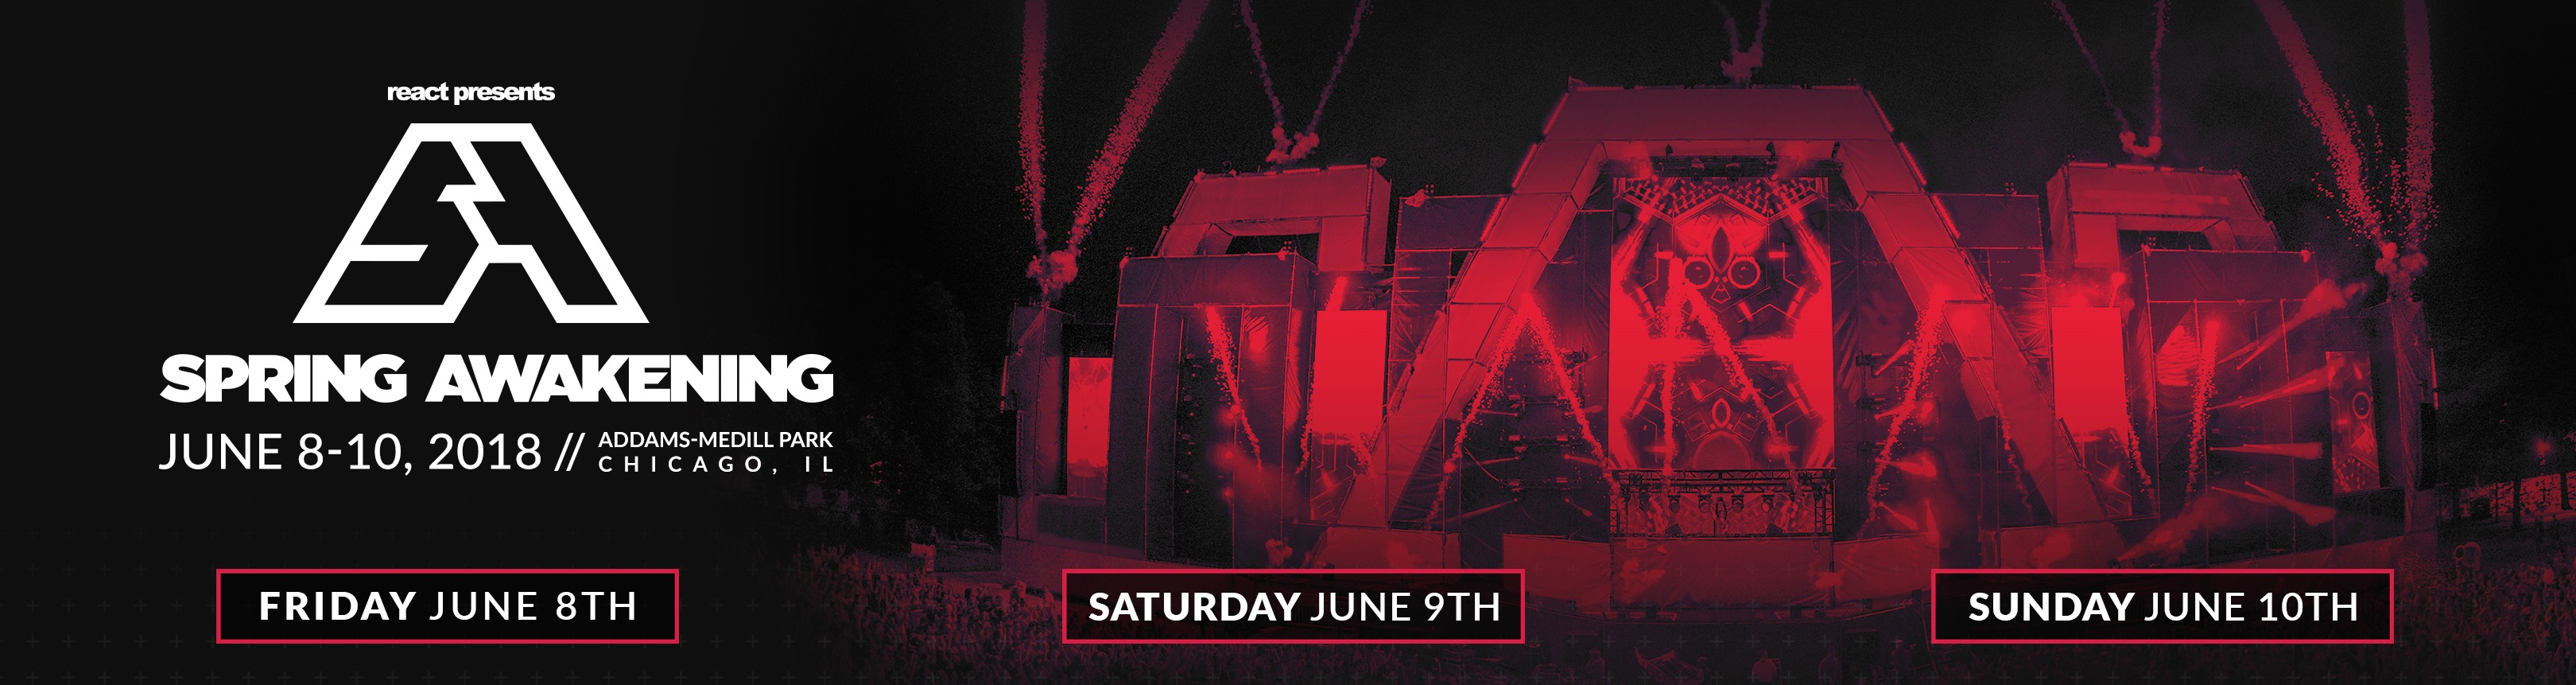 SPRING AWAKENING MUSIC FESTIVAL is thrilled to announce the daily artist lineup and release single day tickets for 2018. Single day tickets start at $69 for GA and $129 for VIP, while three-day passes remain reasonably priced at $199 for GA and $289 for VIP.